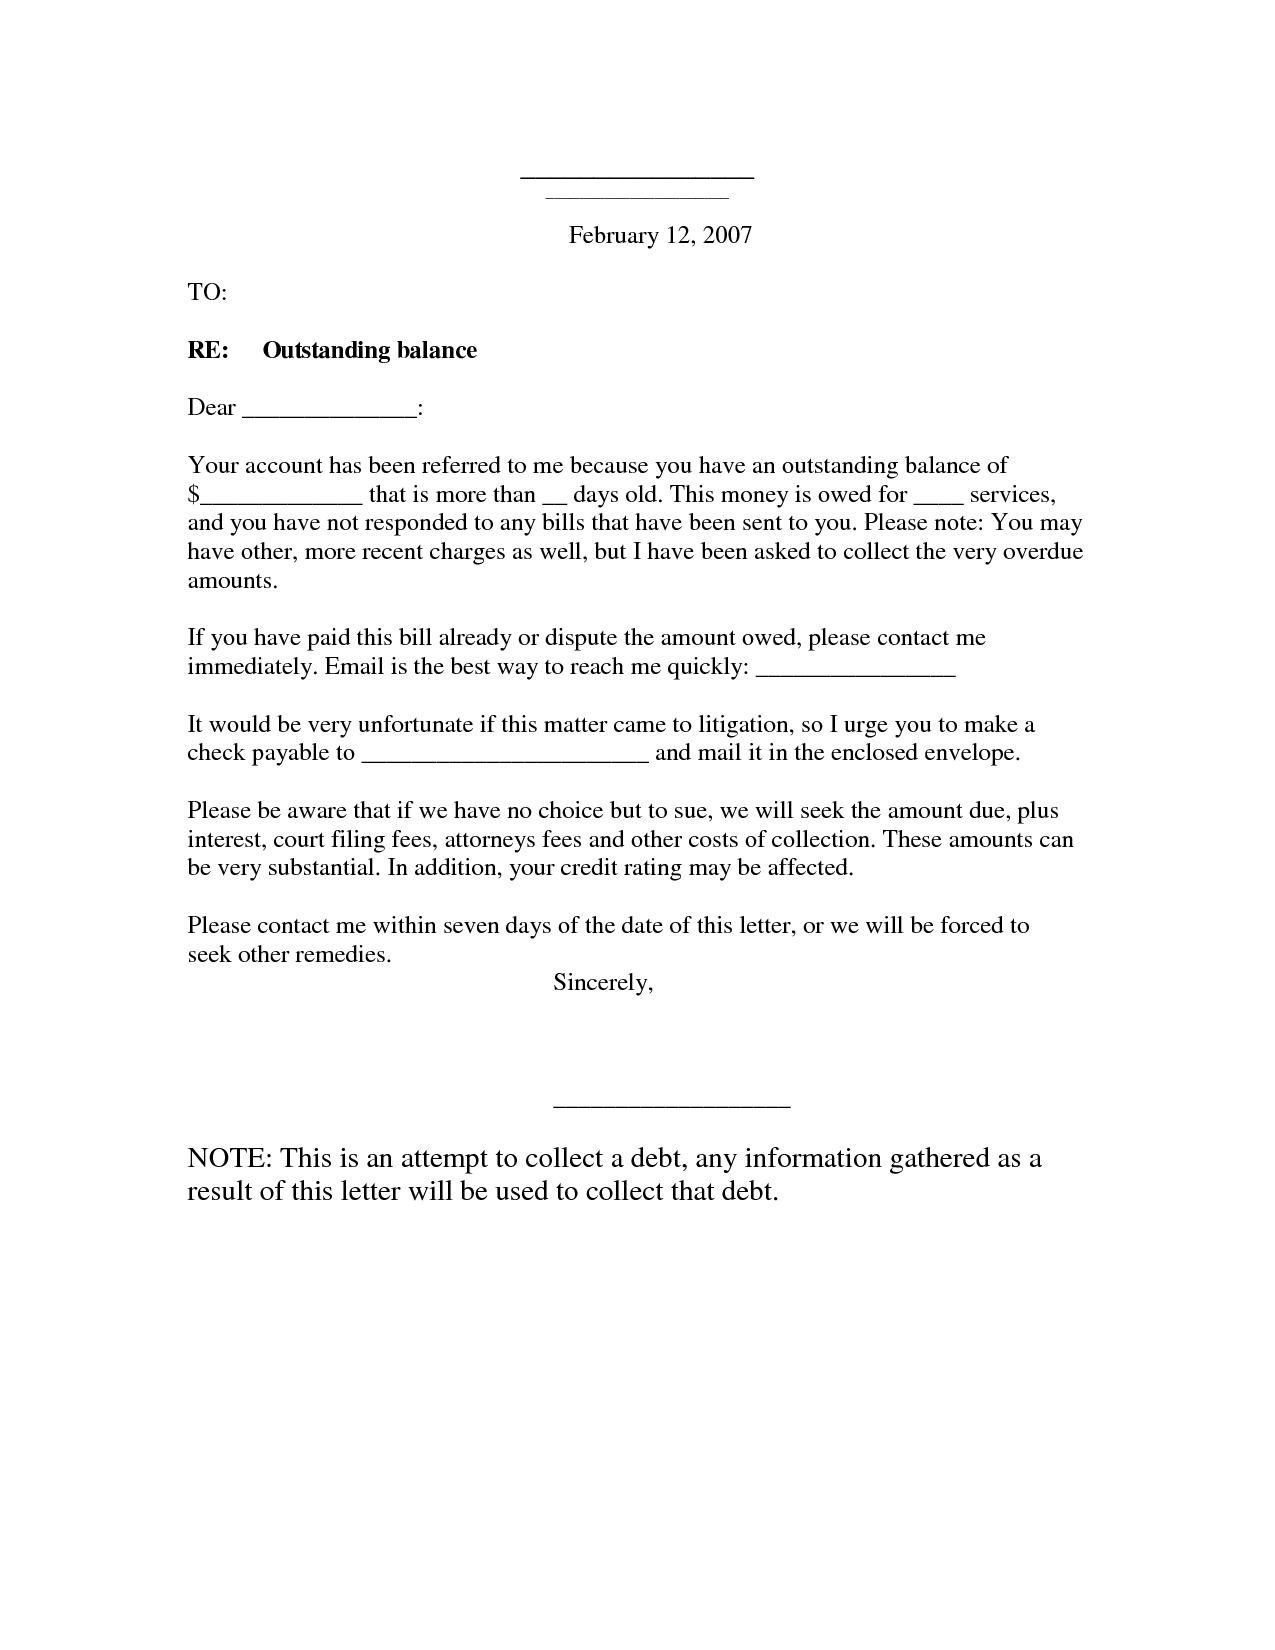 Demand Letter Template for Money Owed - How to Write A Letter when someone Owes You Money Letter